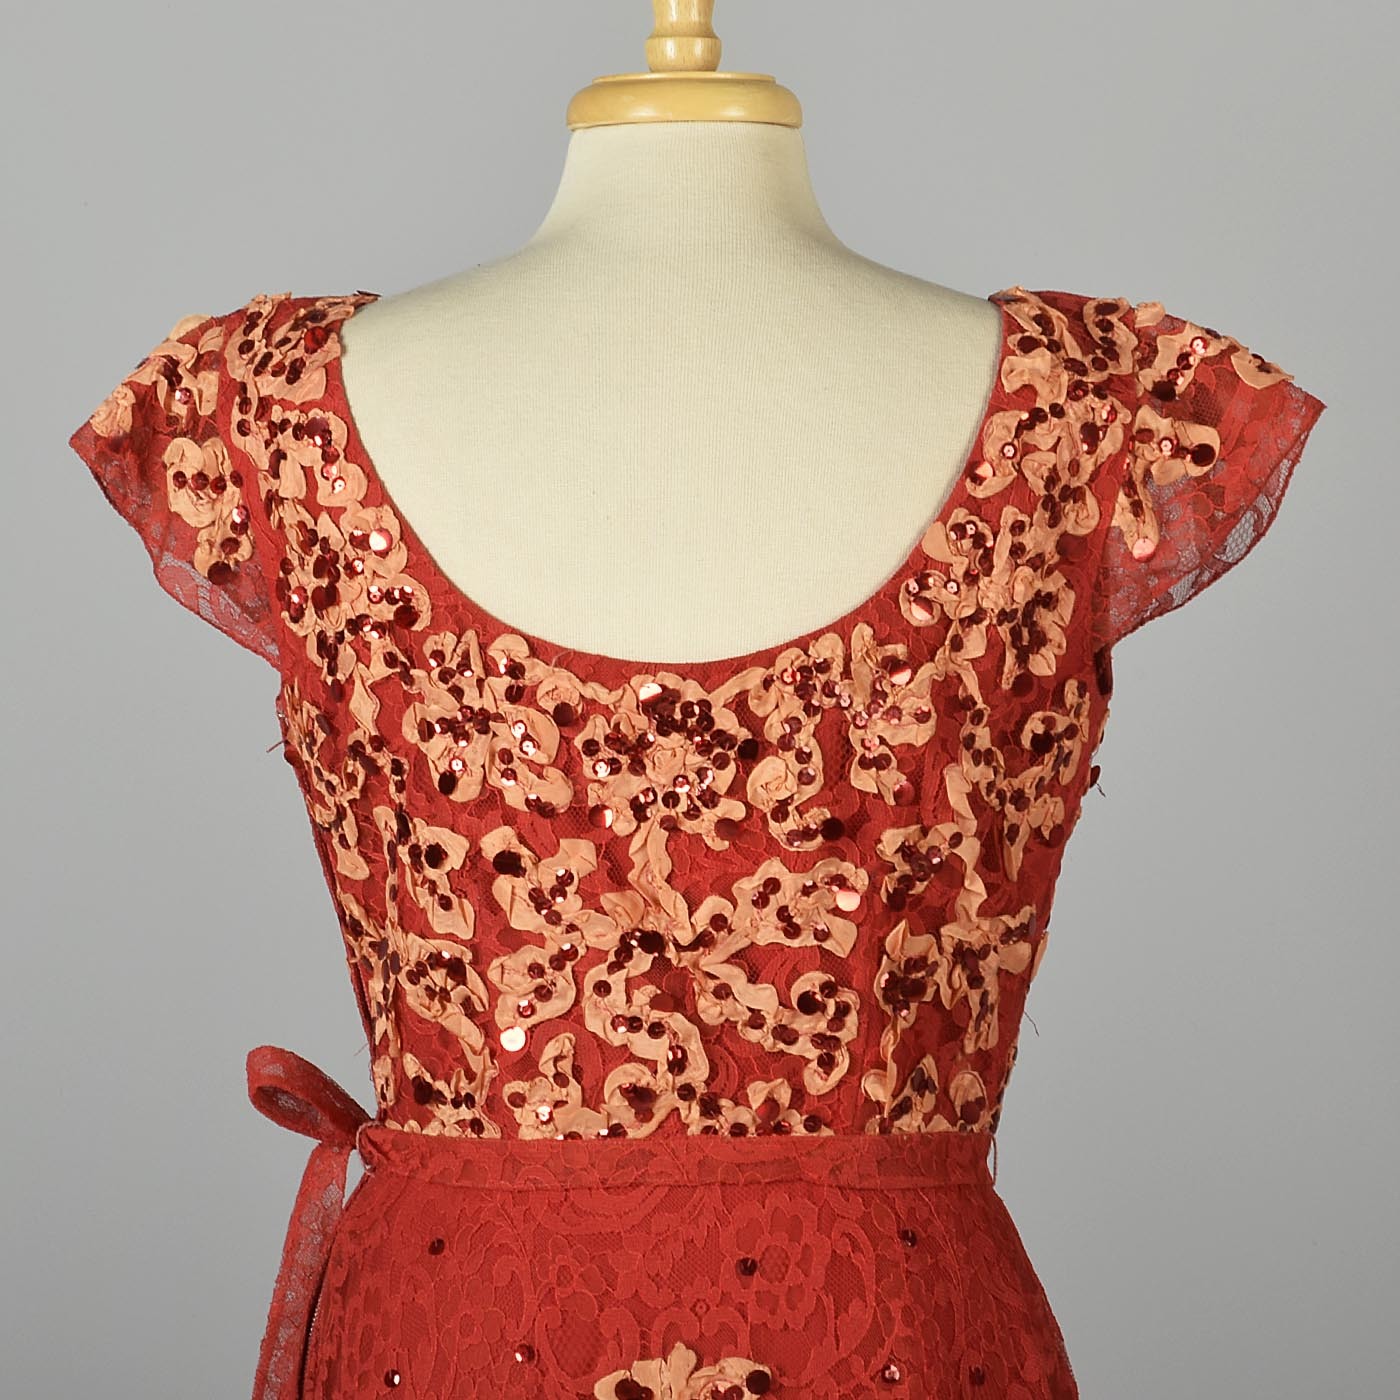 1940s Red Lace Fit & Flare Party Dress by Patric of Miss America